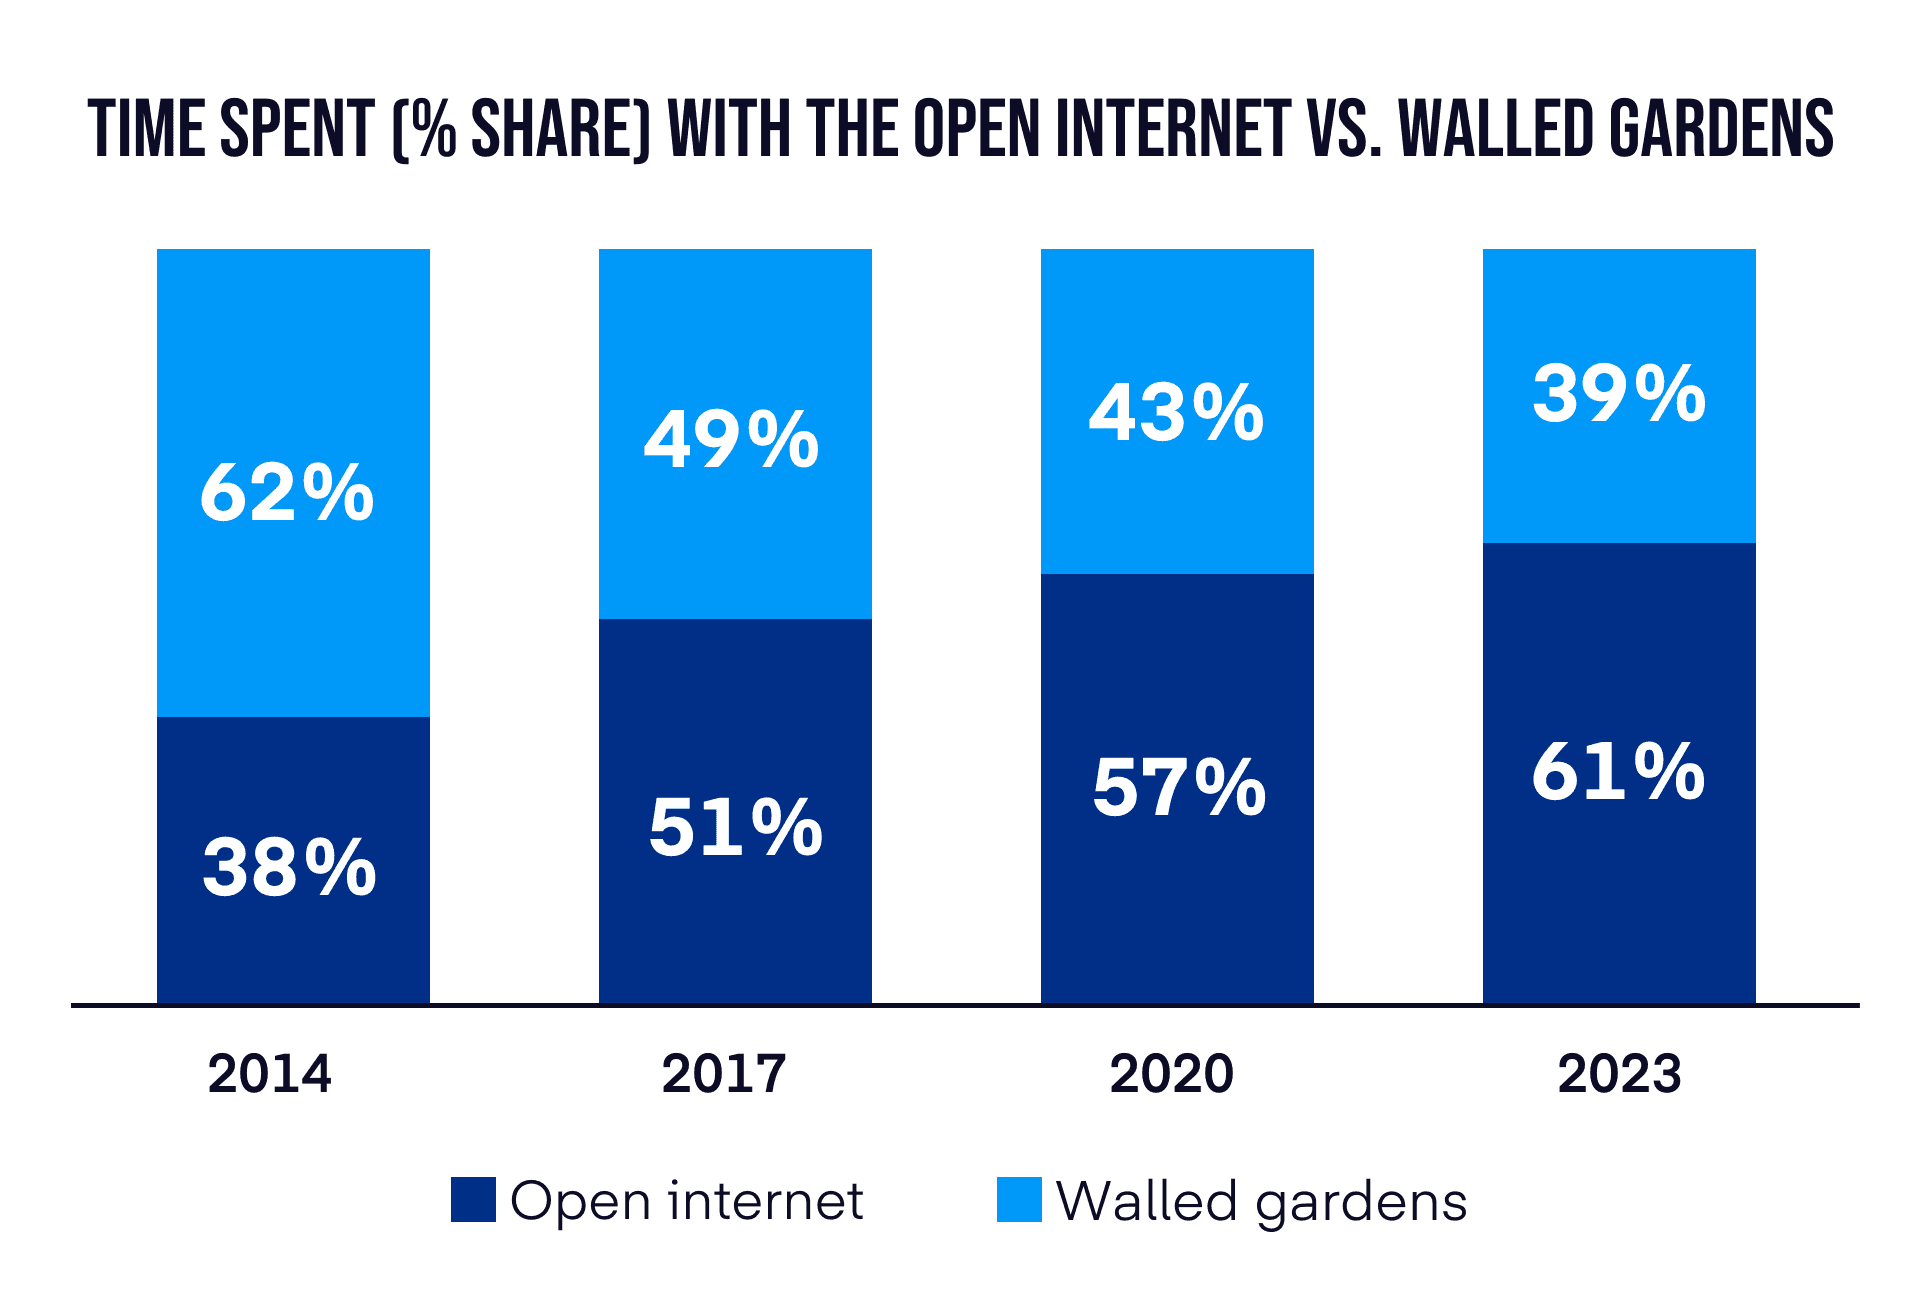 Blue bar chart representing 'Time spent (% share) with the open internet vs. walled gardens